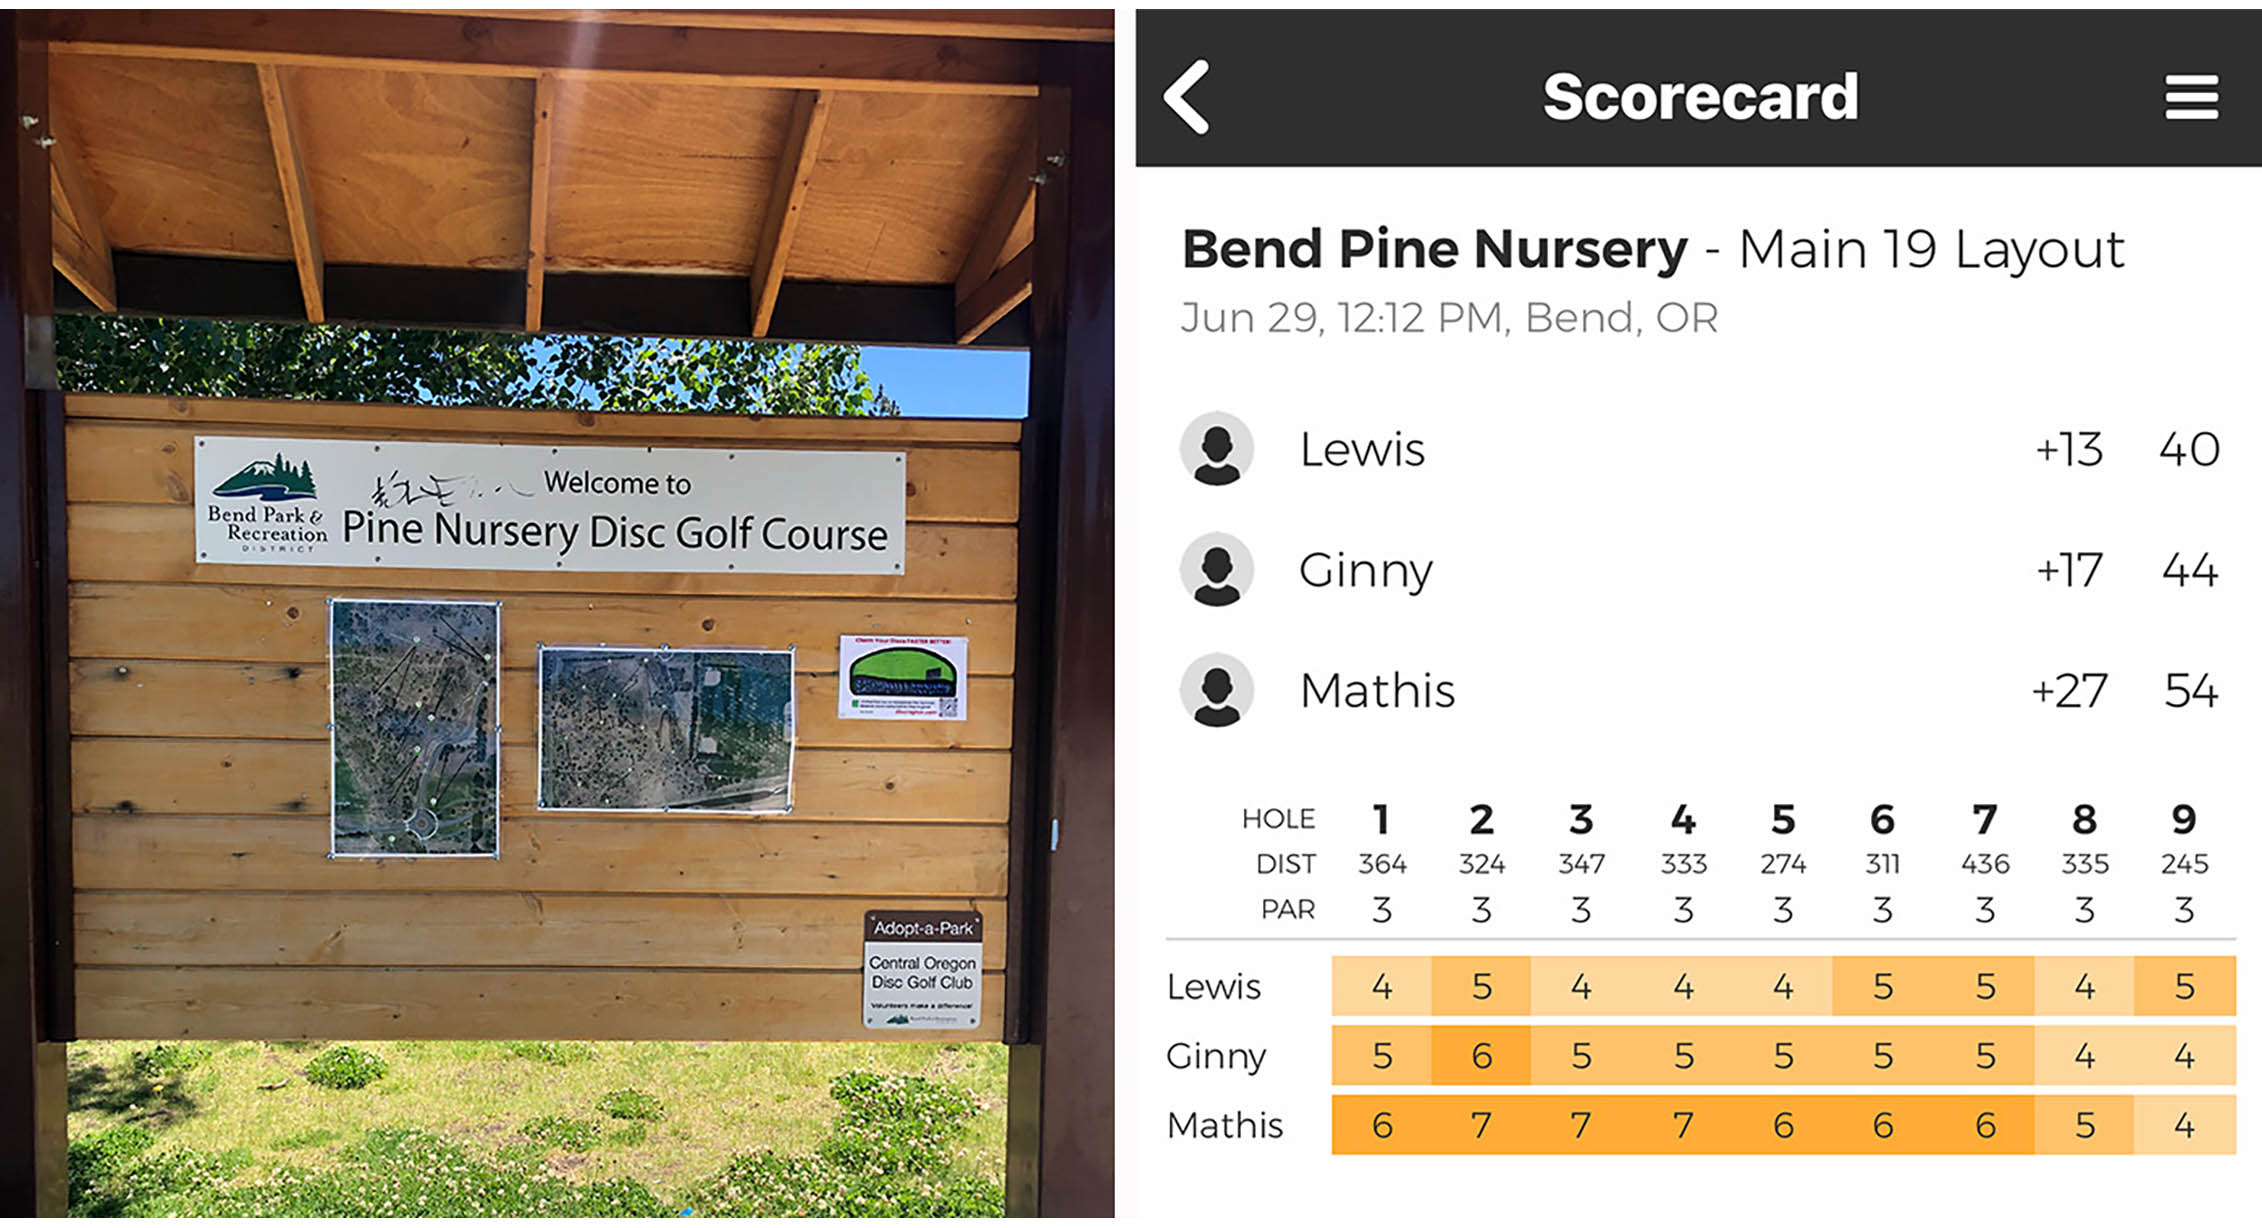 scorecard and sign at Pine Nursery Disc Golf Course